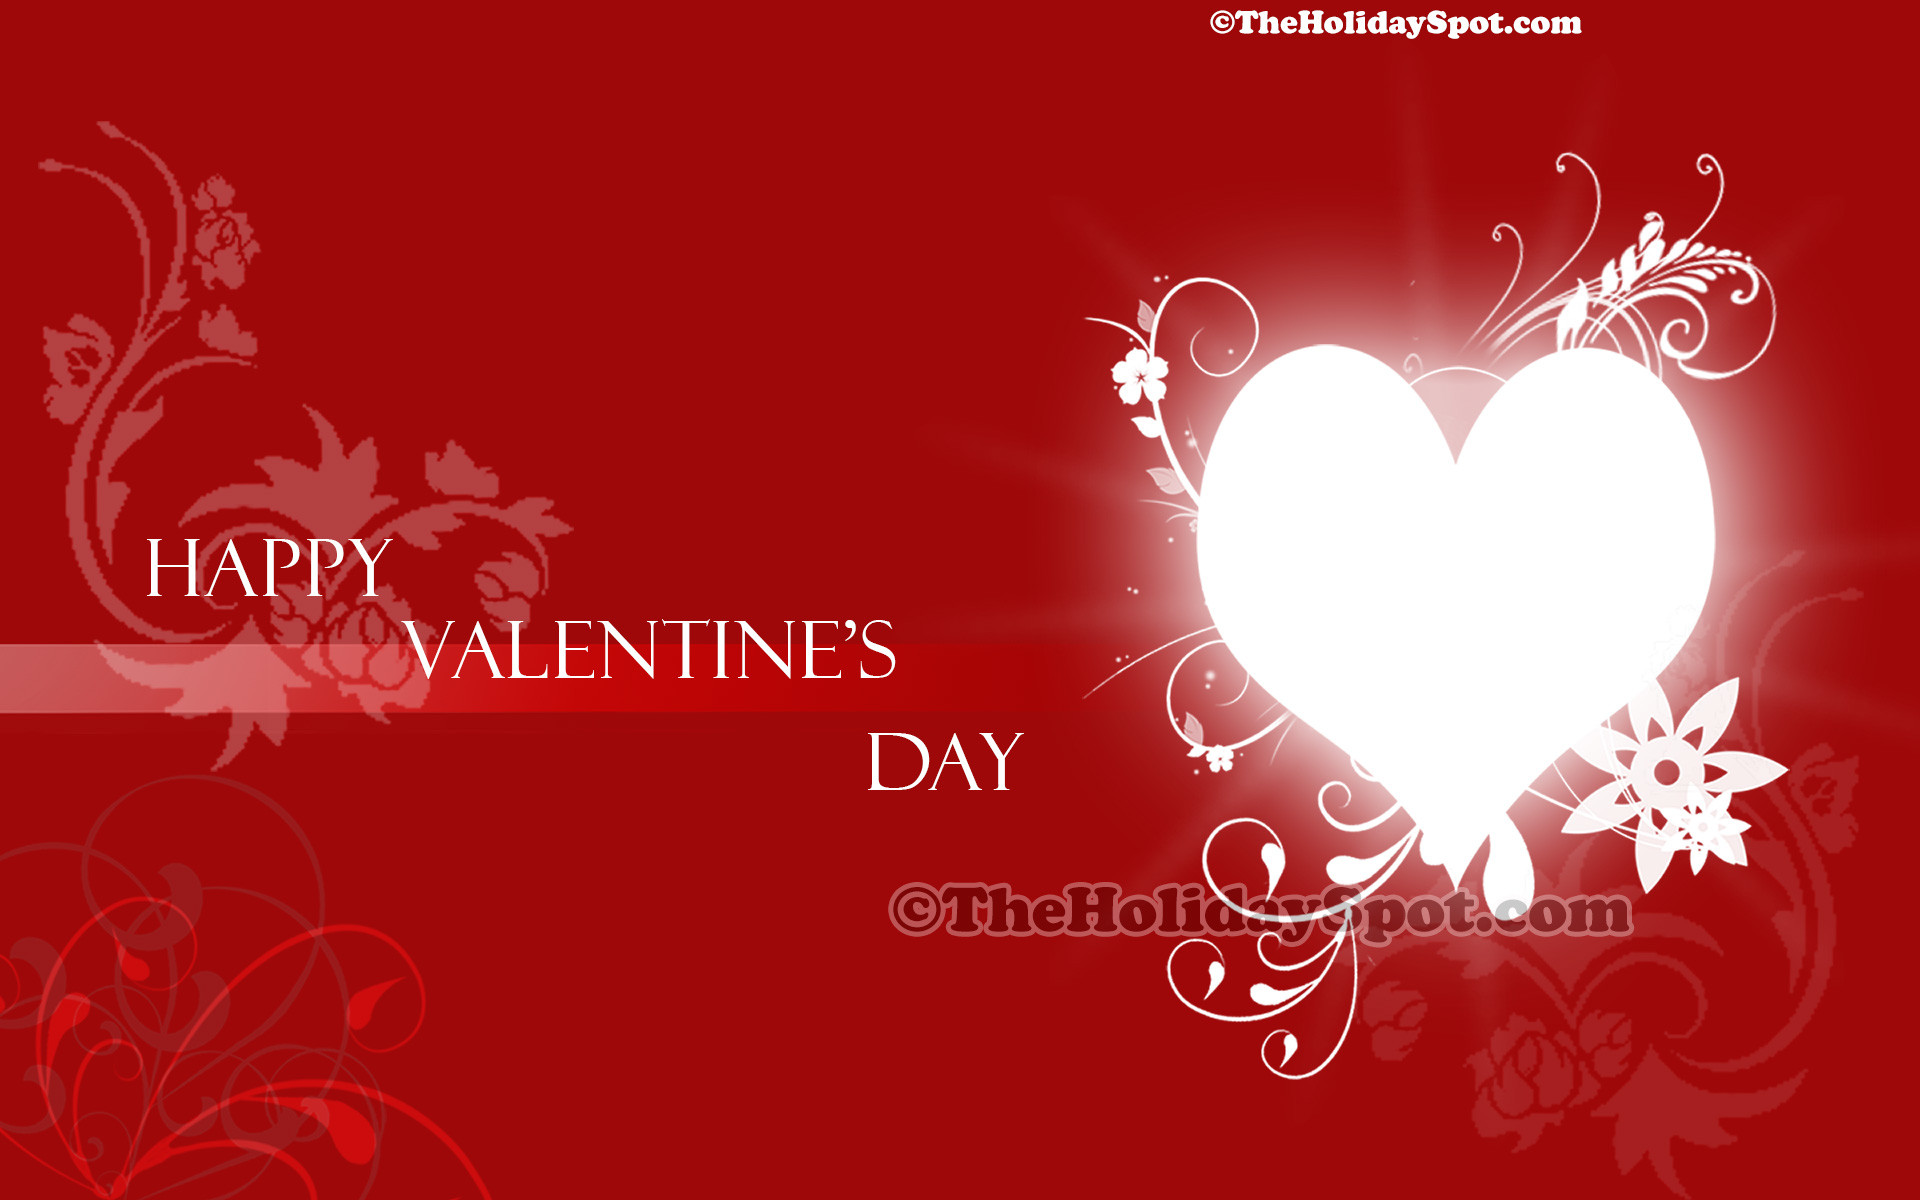 1920x1200 A wonderful graphics based on Valentine's Day